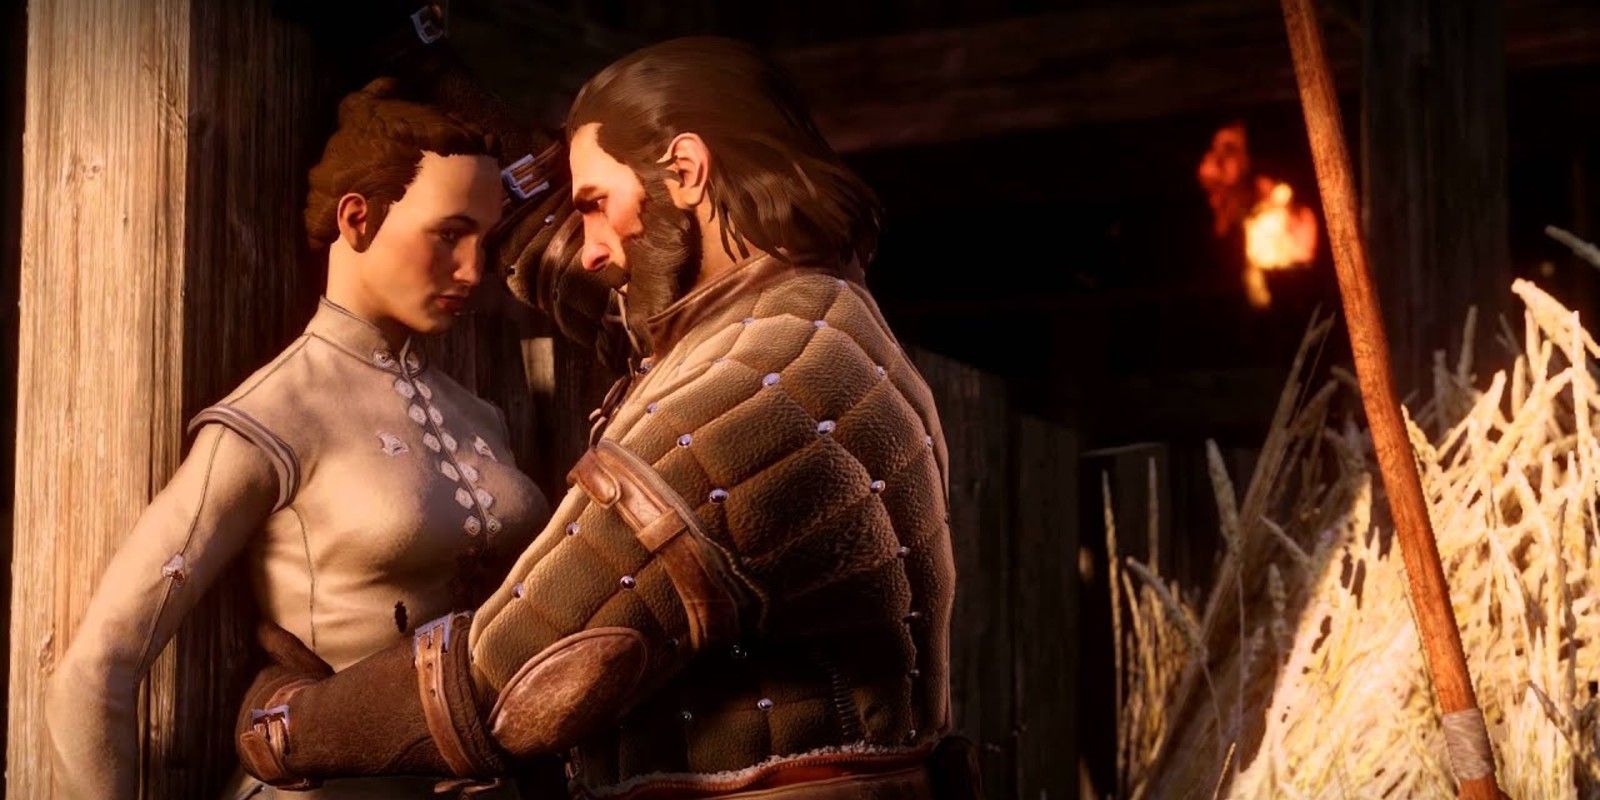 A player romances Blackwall and shares a moment with him in the Skyhold stables in Dragon Age: Inquisition